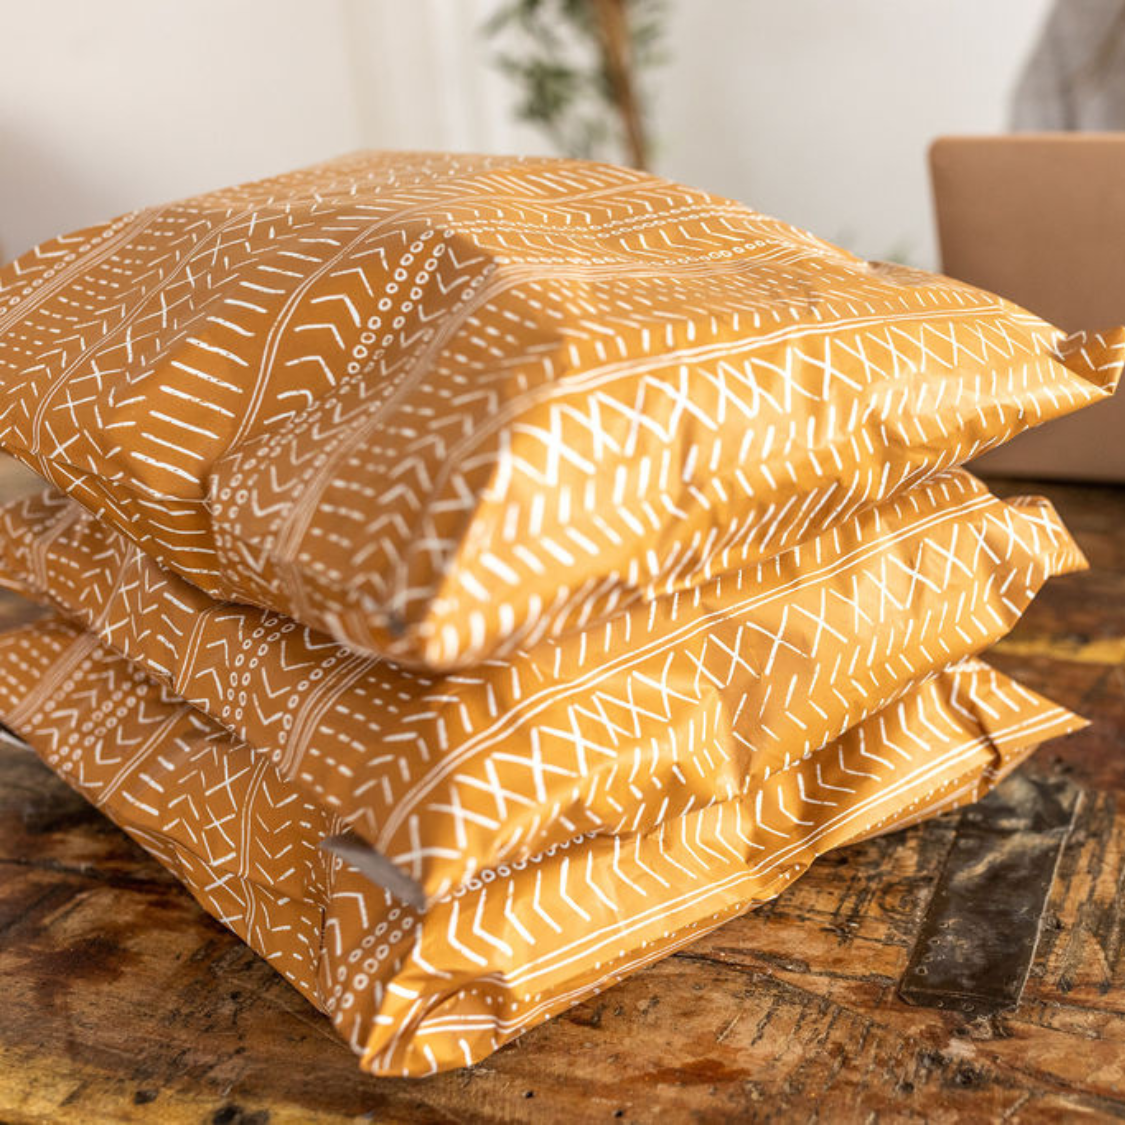 Close-up of Favorite Supplies' Boho Brown Poly Mailers stacked on a table. Showcase of the intricate white block-printed boho line design on the self-sealing plastic shipping envelopes.